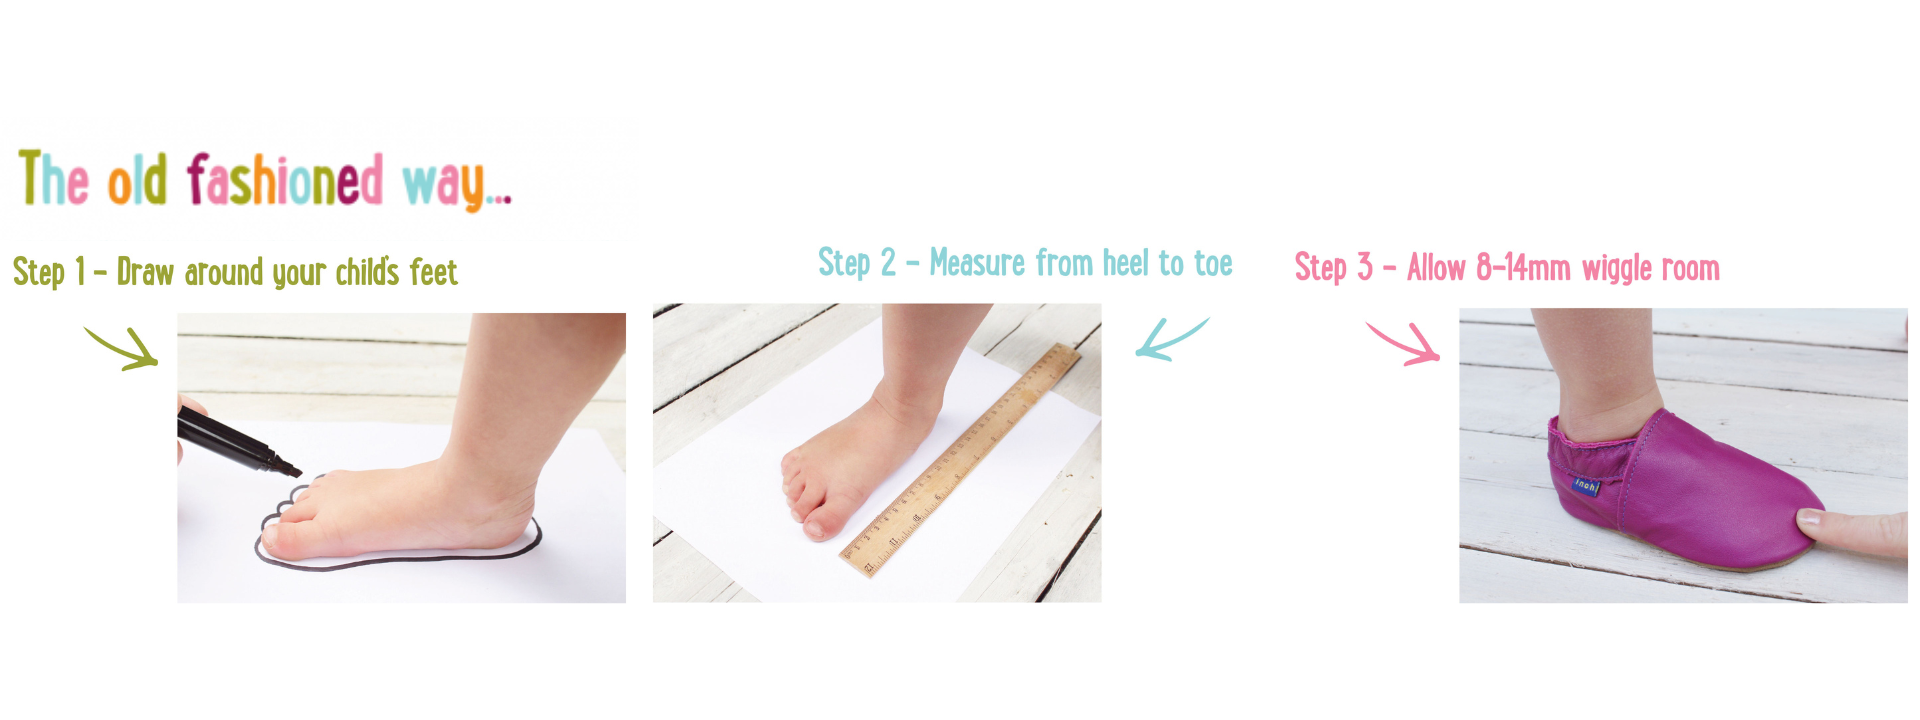 How to measure your child's feet